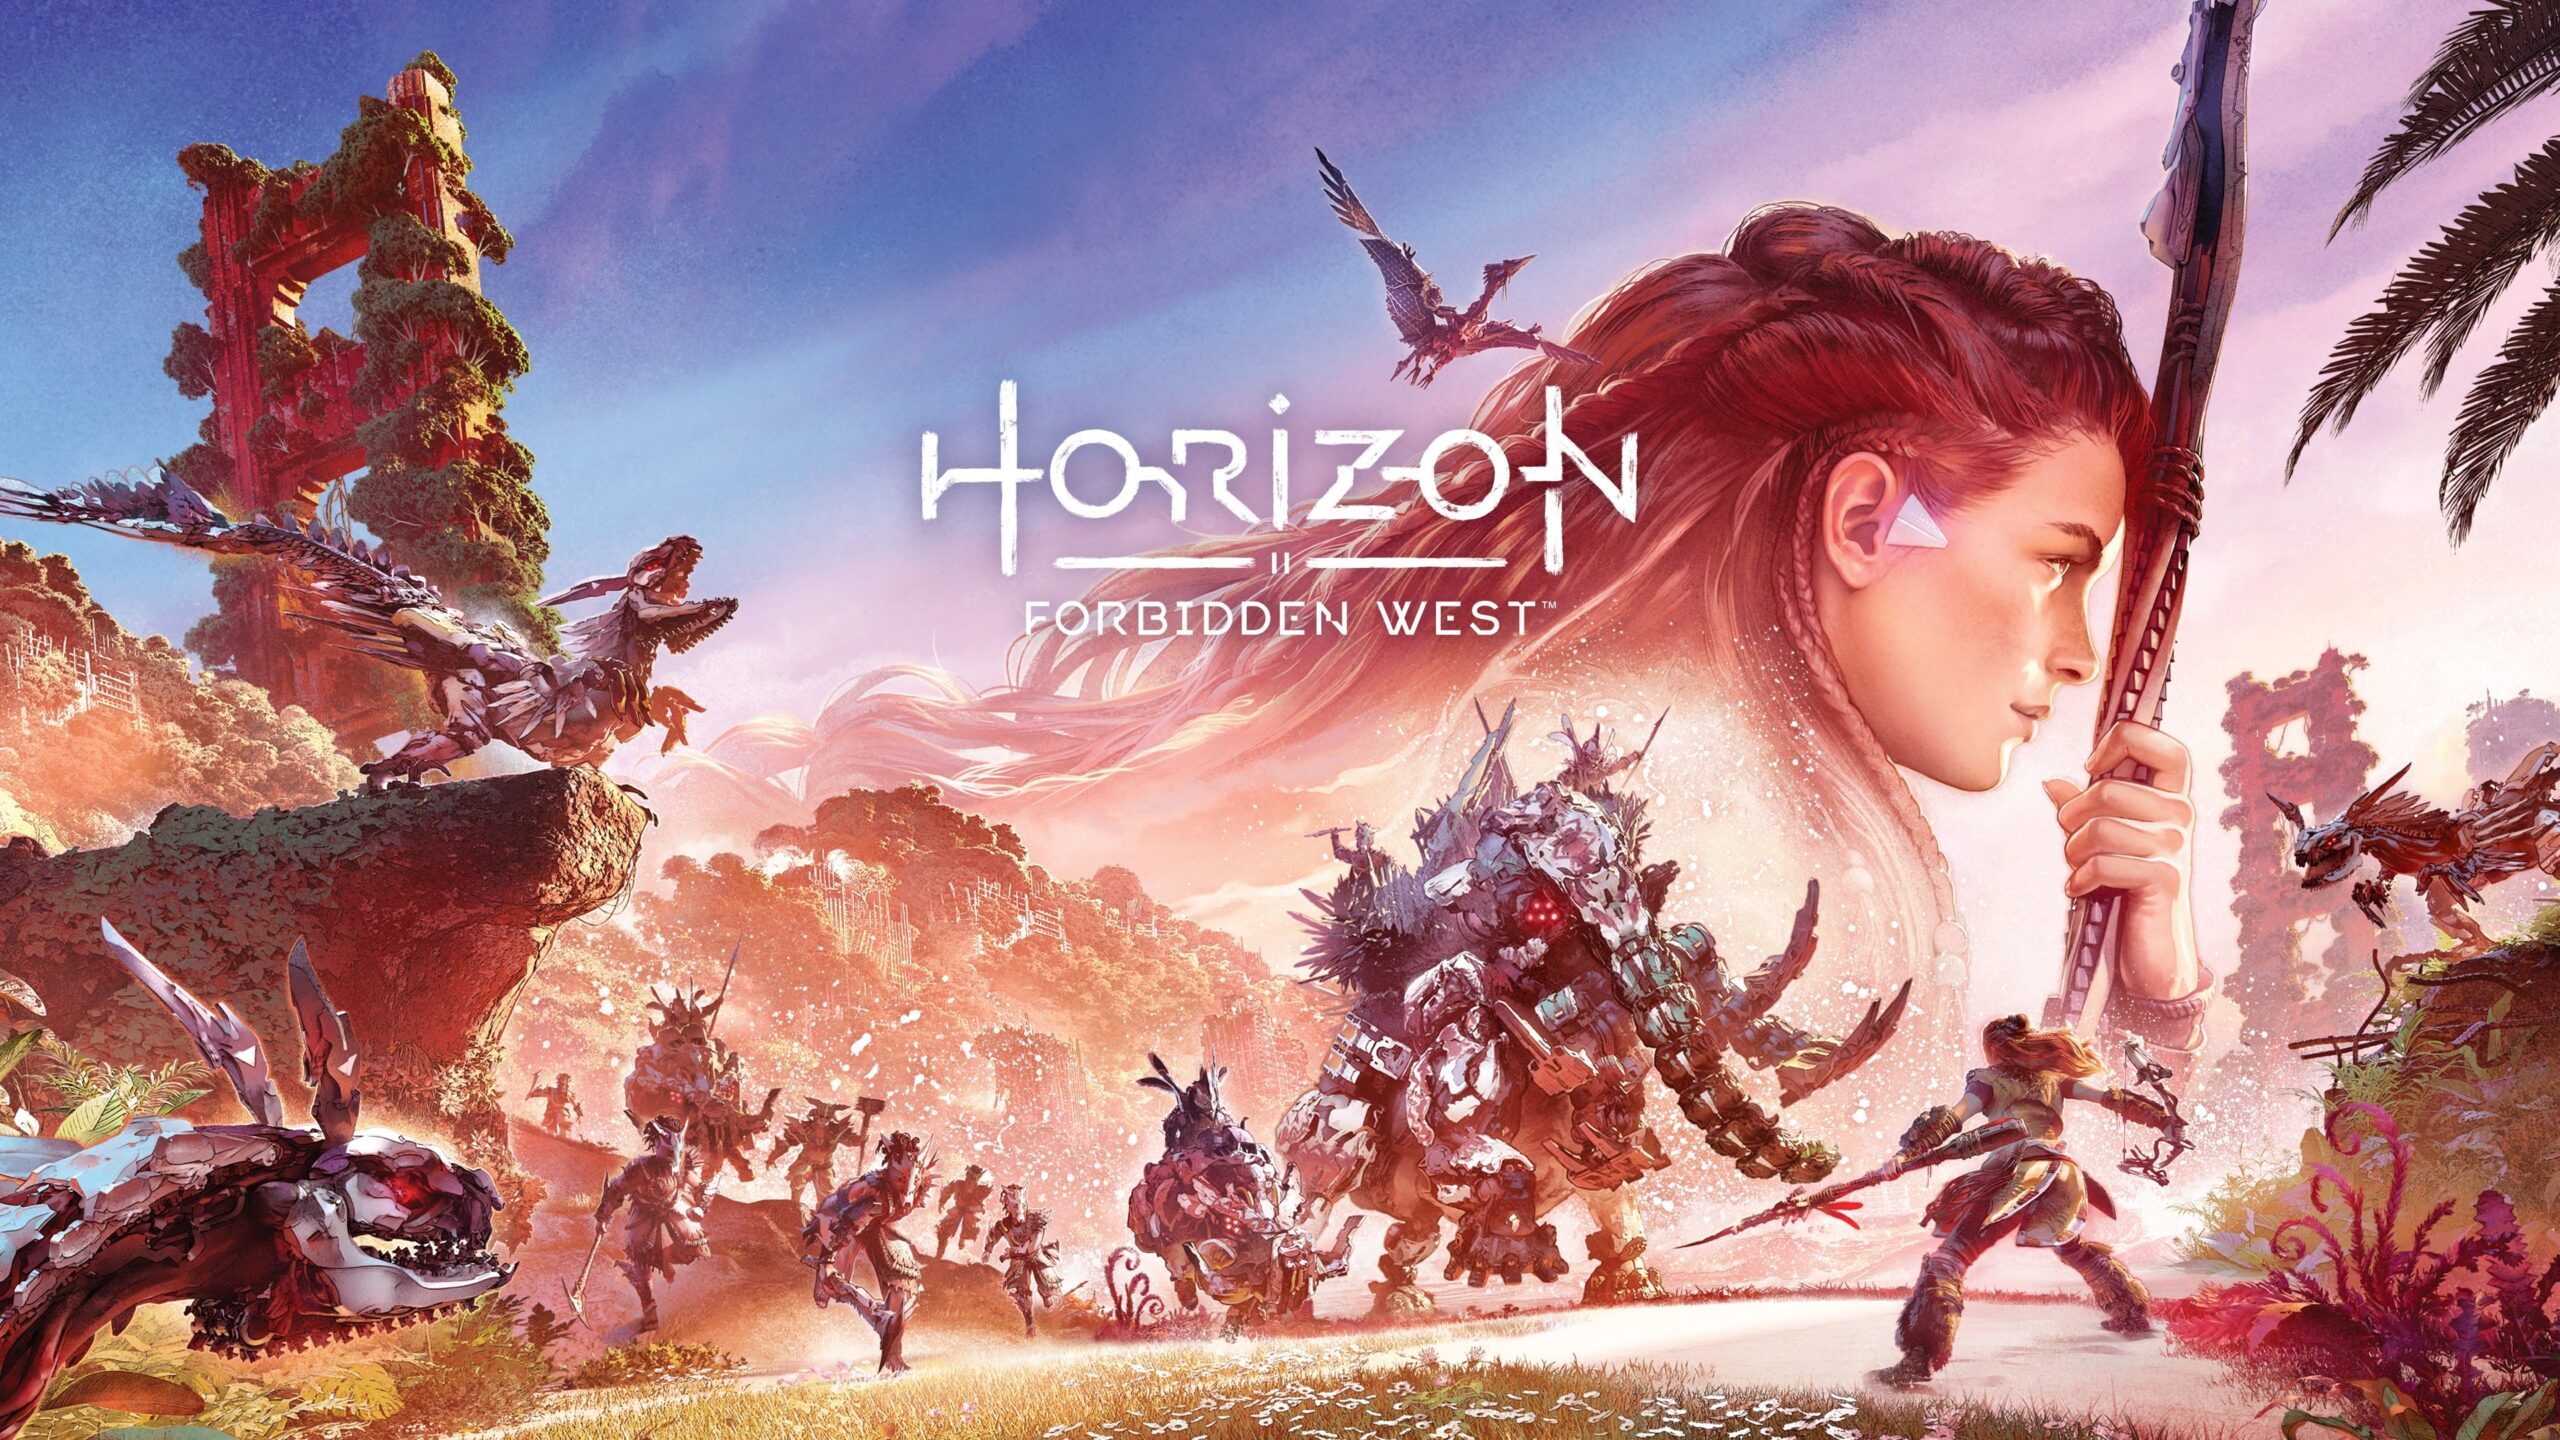 For Southeast Asia) UPDATE: Pre-order Horizon Forbidden West now 